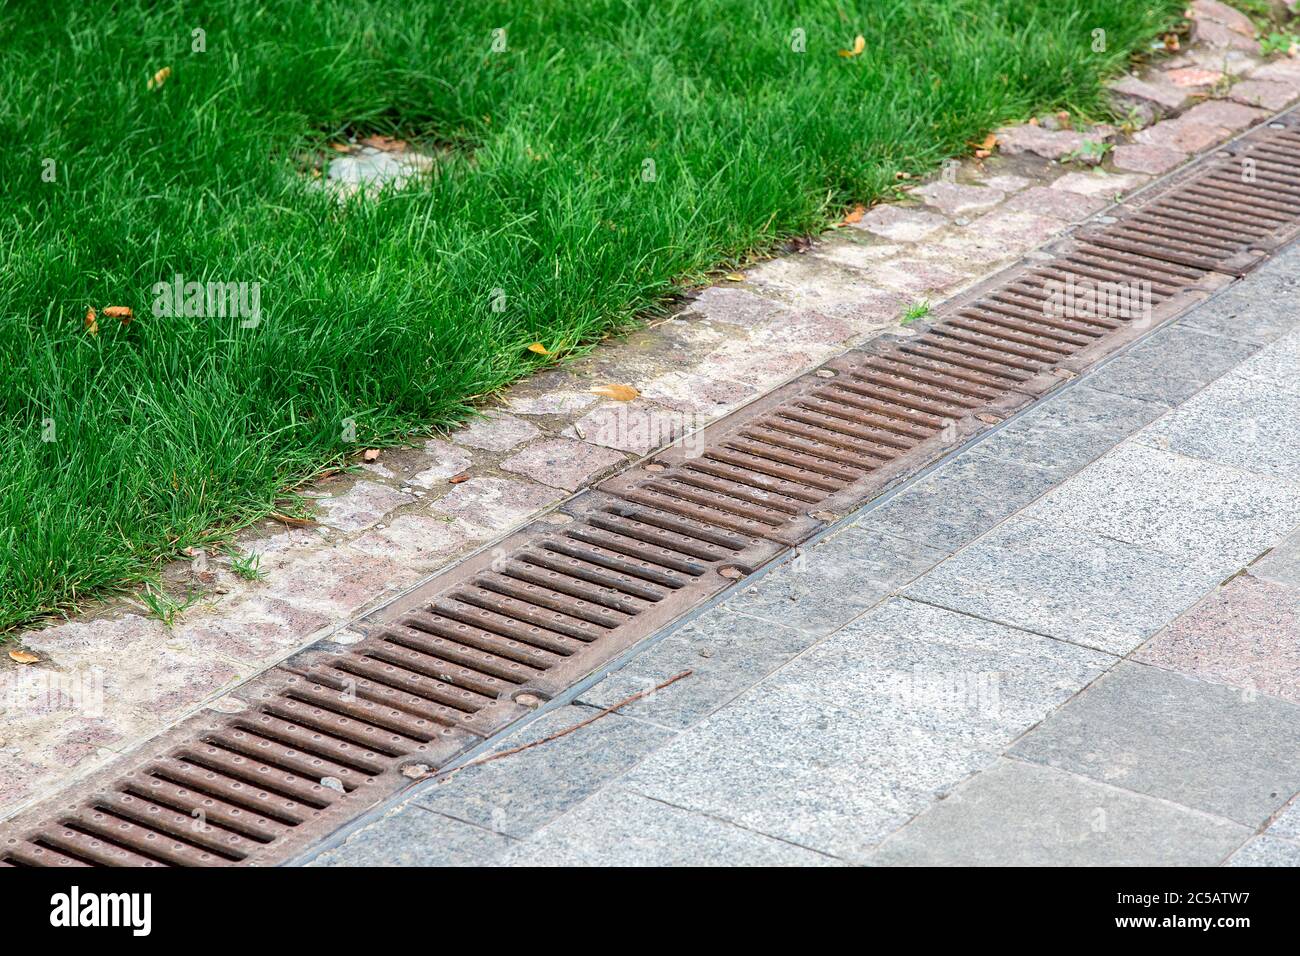 rust drainage grate of a storm system on a pedestrian sidewalk made of stone tiles in a park near a green grass. Stock Photo